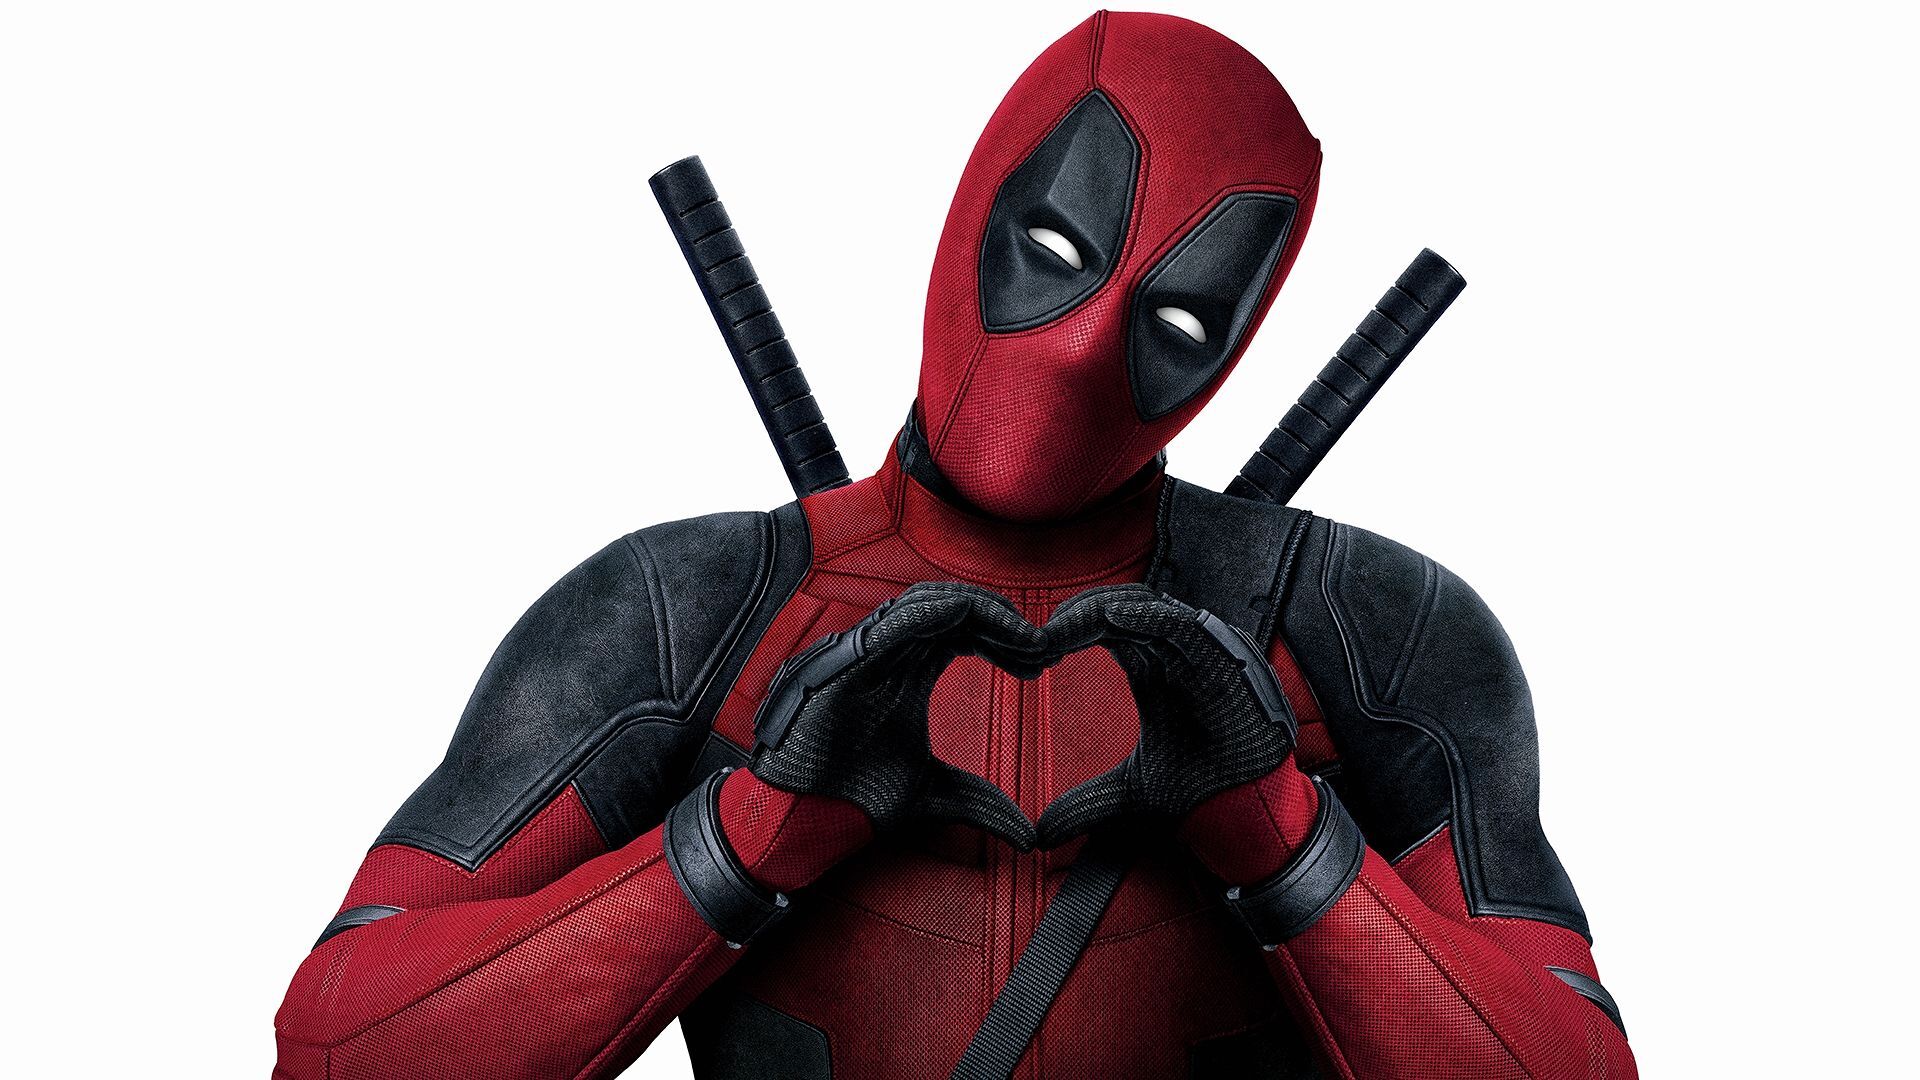 Ryan Reynolds thinks Deadpool should have a boyfriend in the sequel and we agree